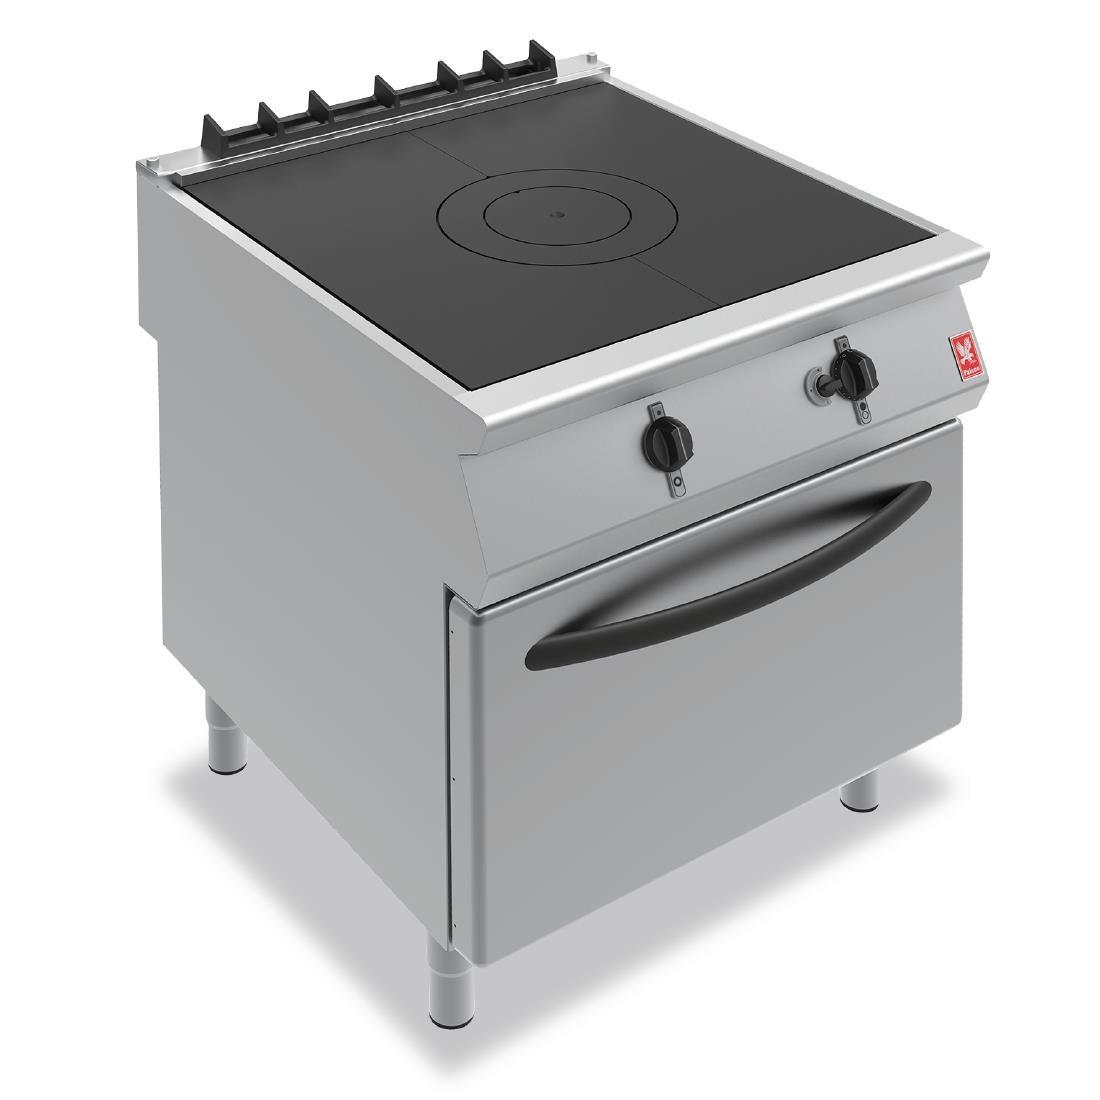 Falcon F900 Solid Top Oven Range on Legs Natural Gas G9181 - GR457-N  - 1